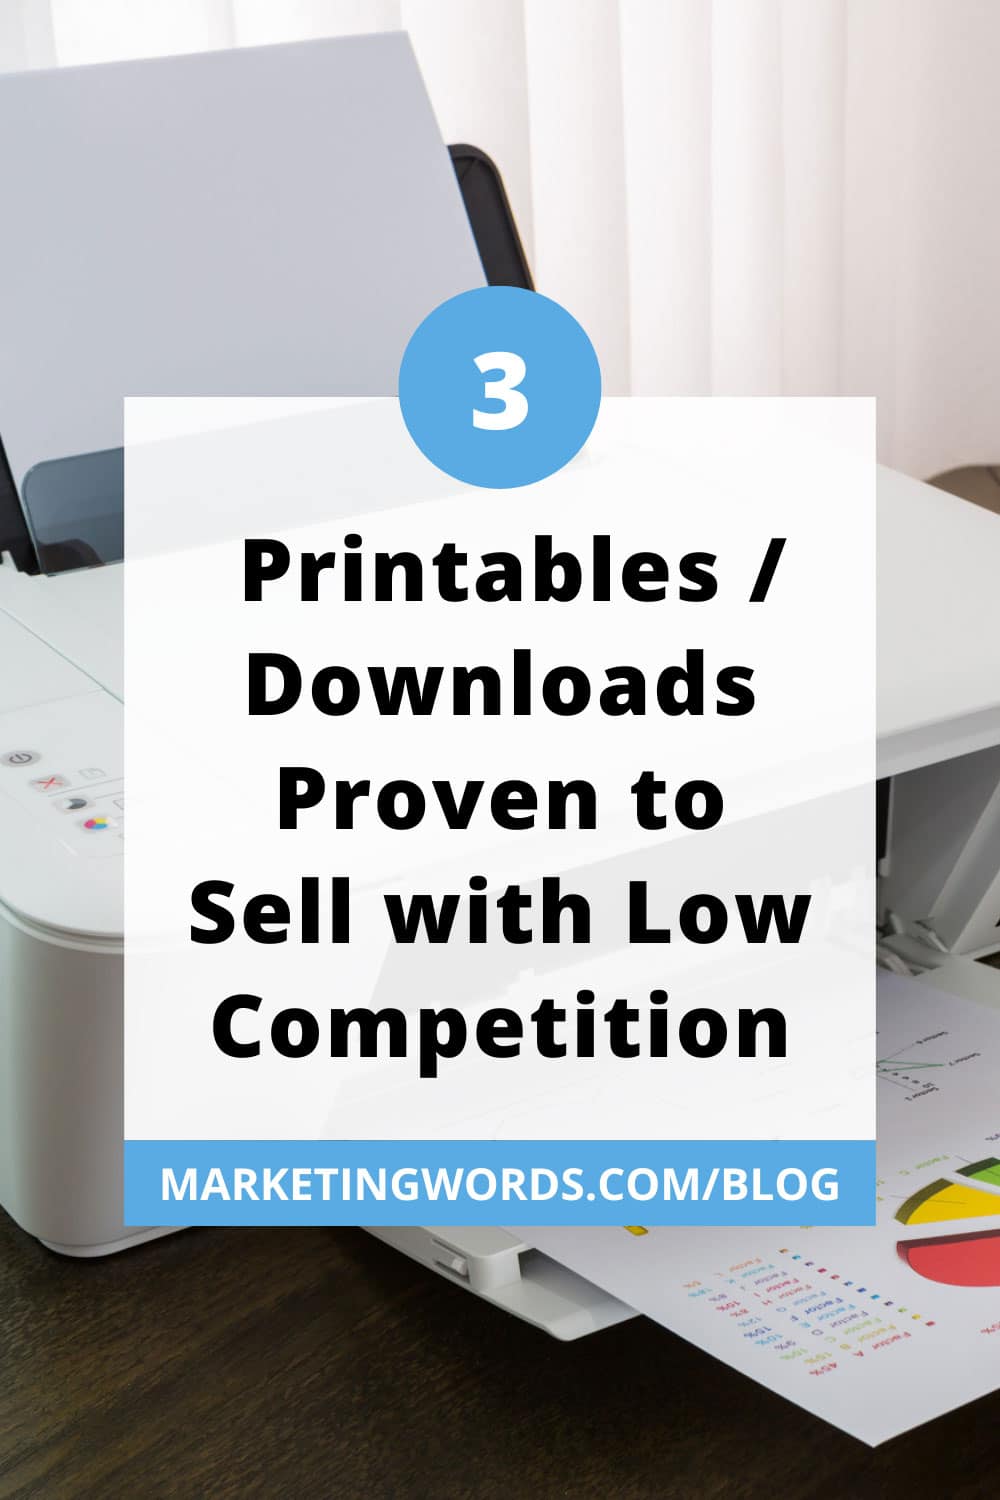 Creating Printables: 3 Printables / Downloads Proven to Sell with Low Competition